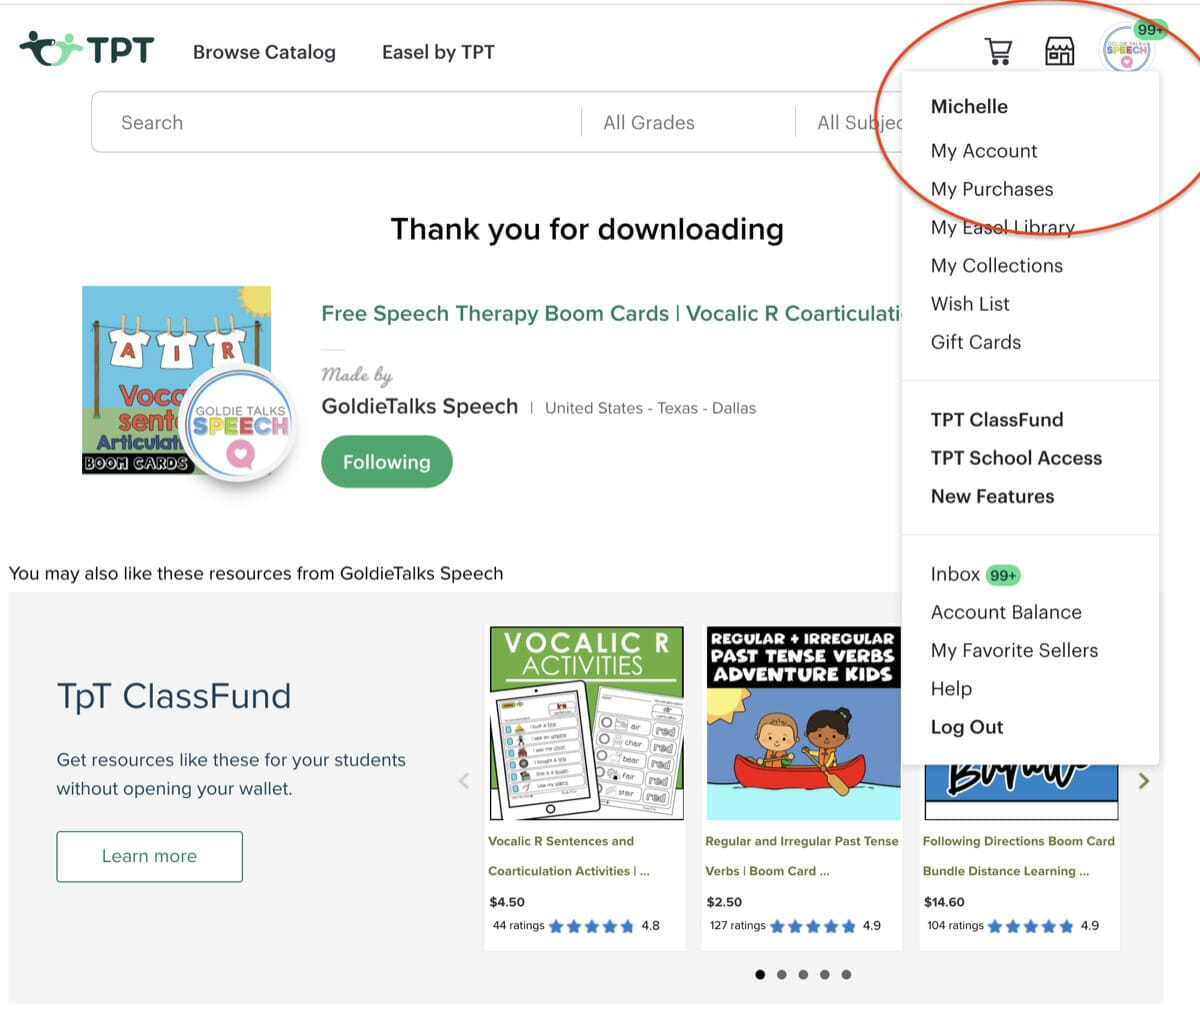 Download your free TpT resource